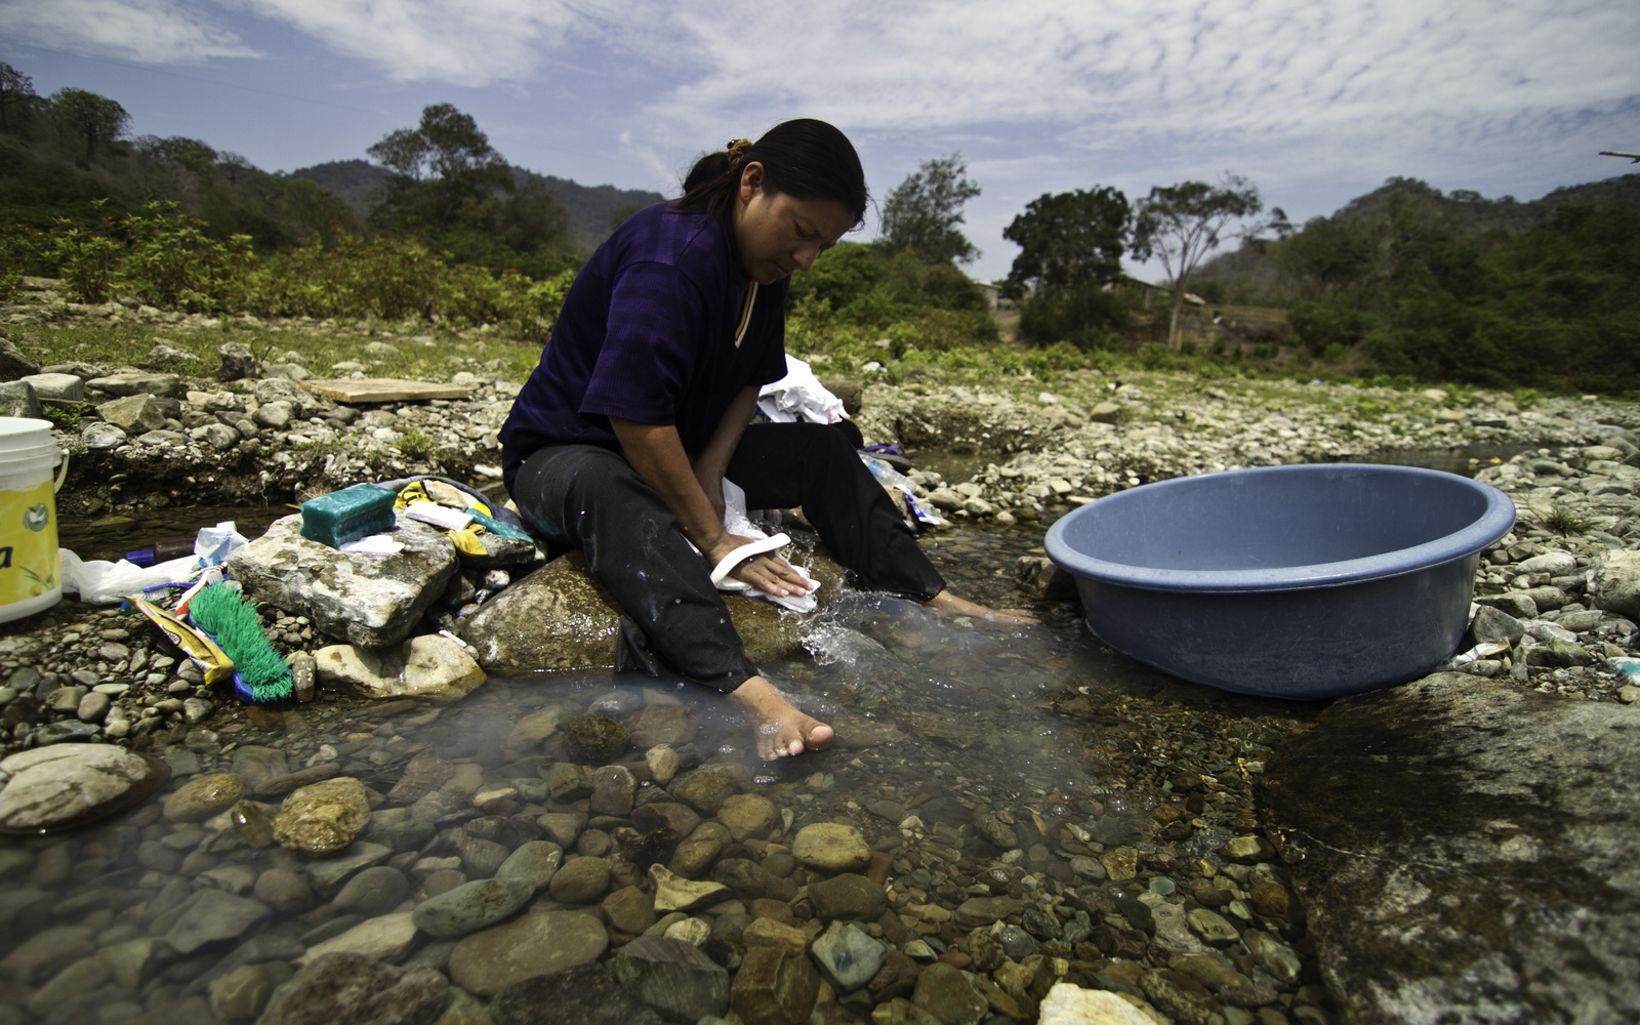 A woman washes clothes in the Ayampe River in Ecuador’s Manabí Province. The Ayampe River has many responsibilities beyond its ecological role. It also supports the life of the communities within its watershed. The Conservancy is working with local partners to develop a water fund to help protect this water source.